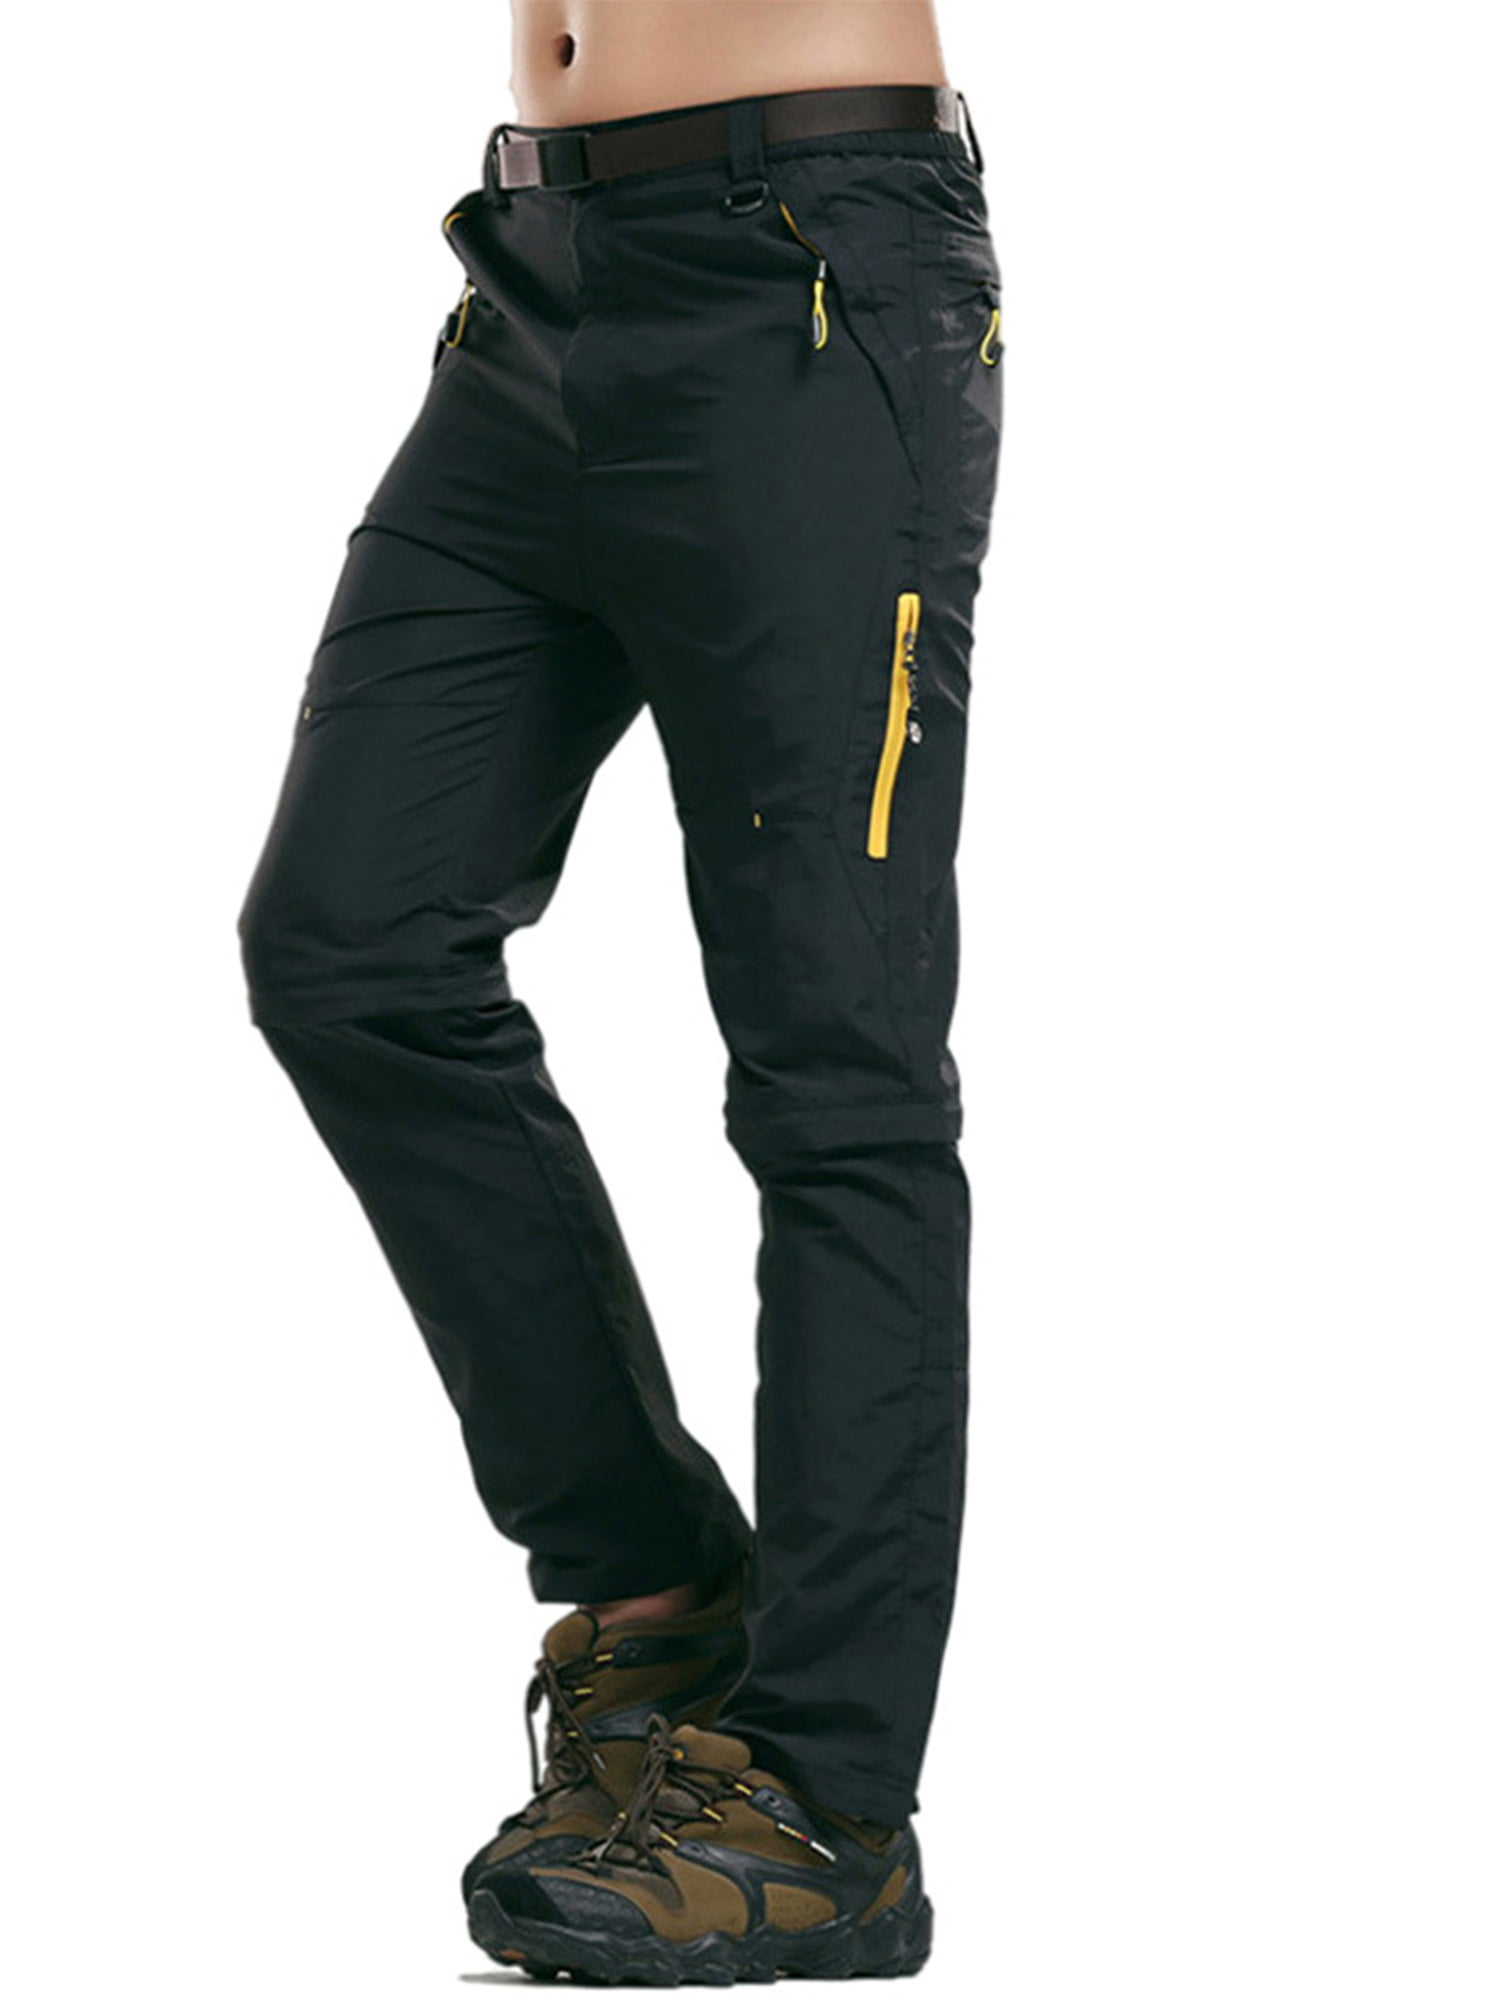 Men Waterproof Quick Dry Breathable Sports Modern Trousers Pants Loose Over Size 